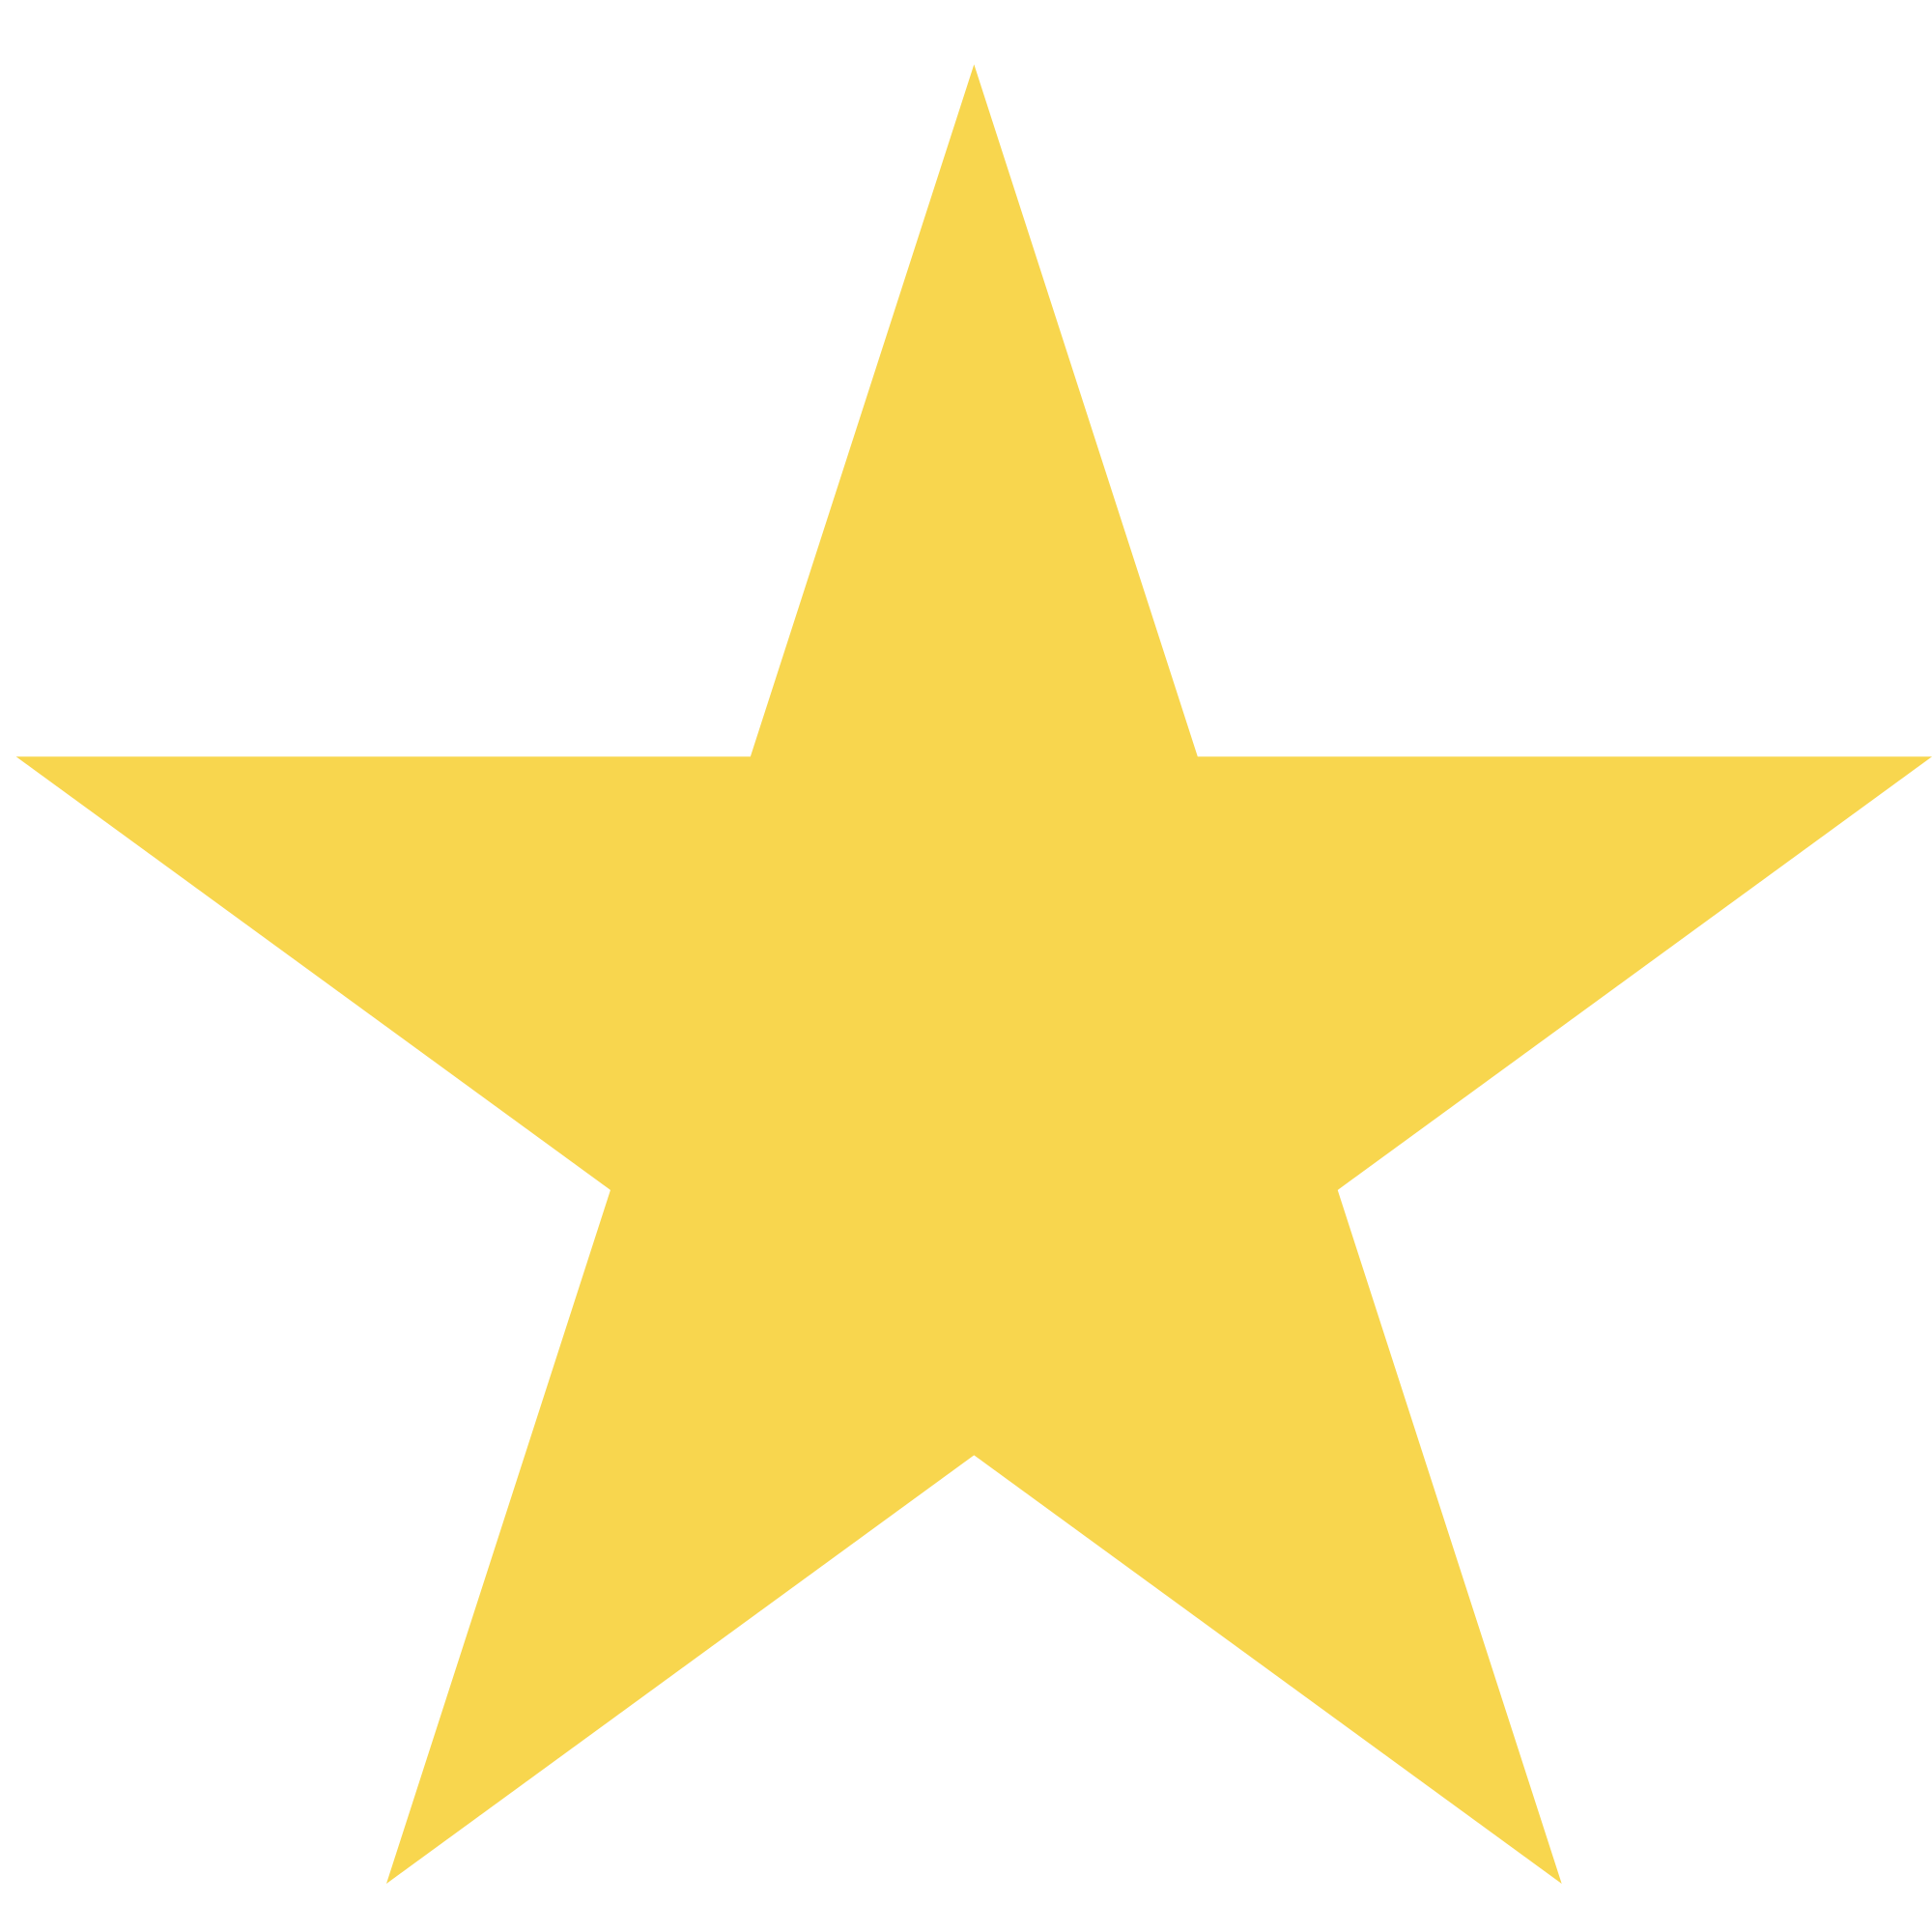 File:Gold Star - Wikimedia Commons